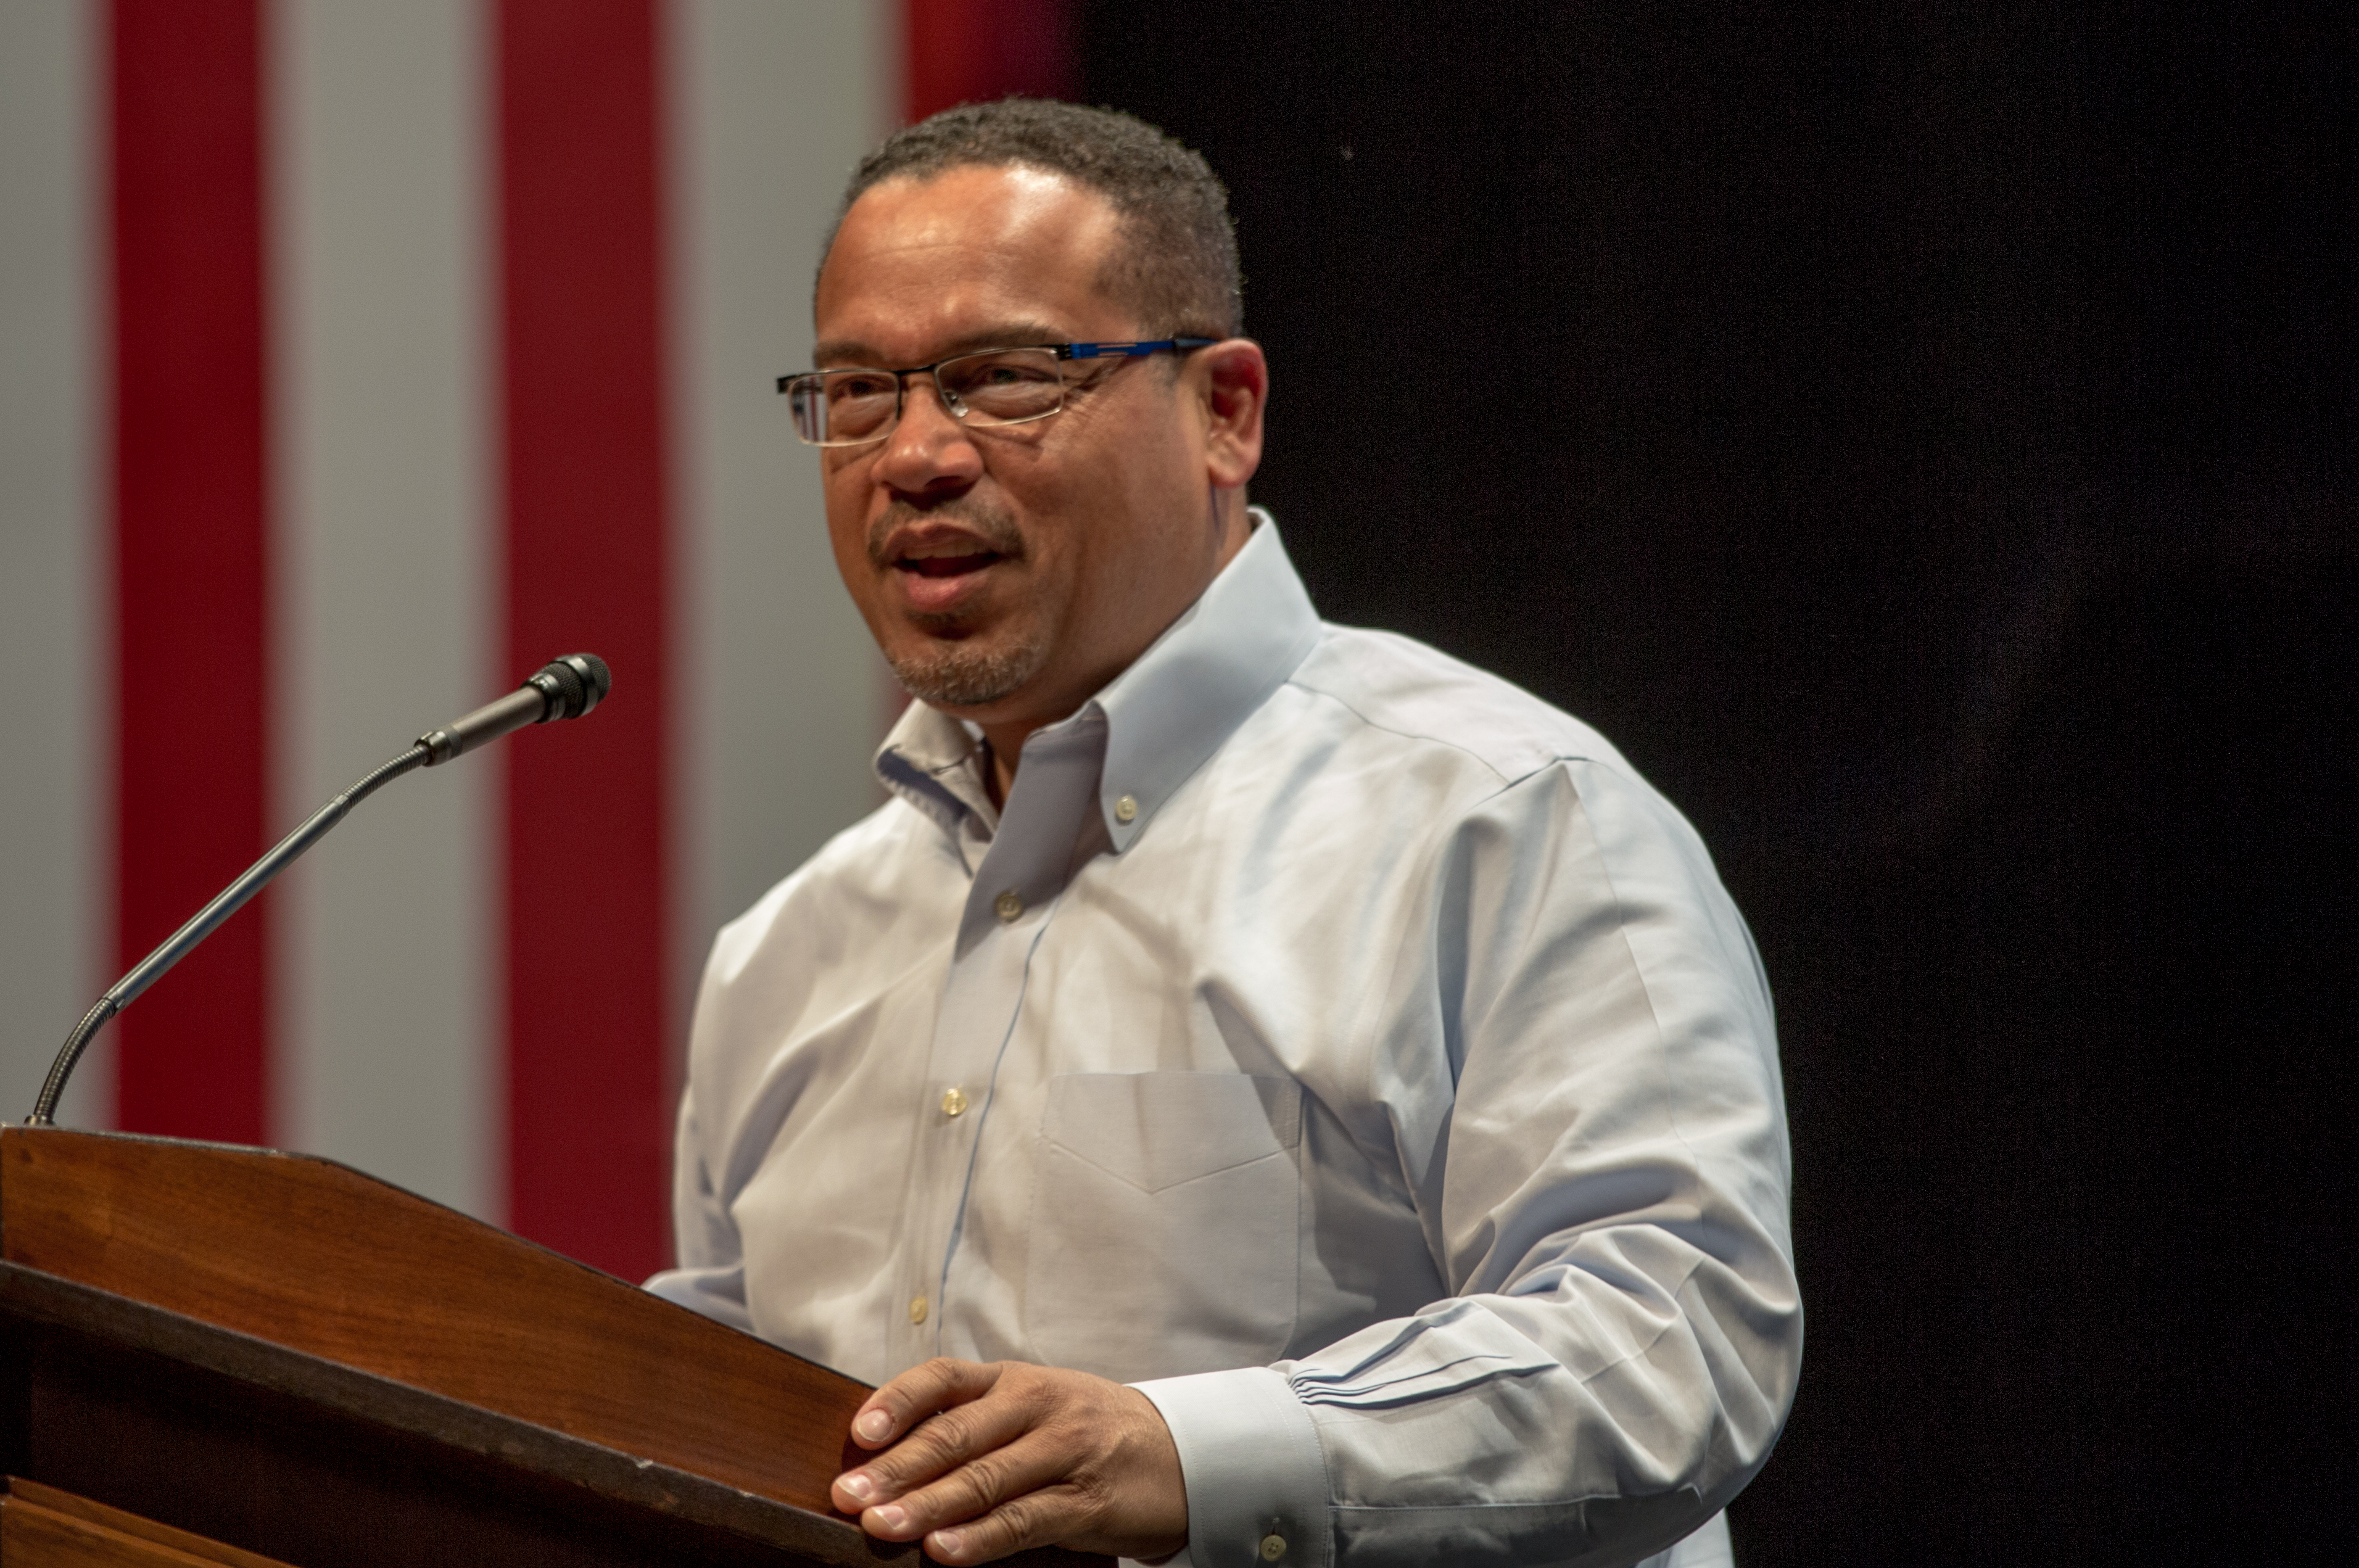 keith_ellison2c_u-s-_house_of_representatives_from_minnesota27s_5th_district_01